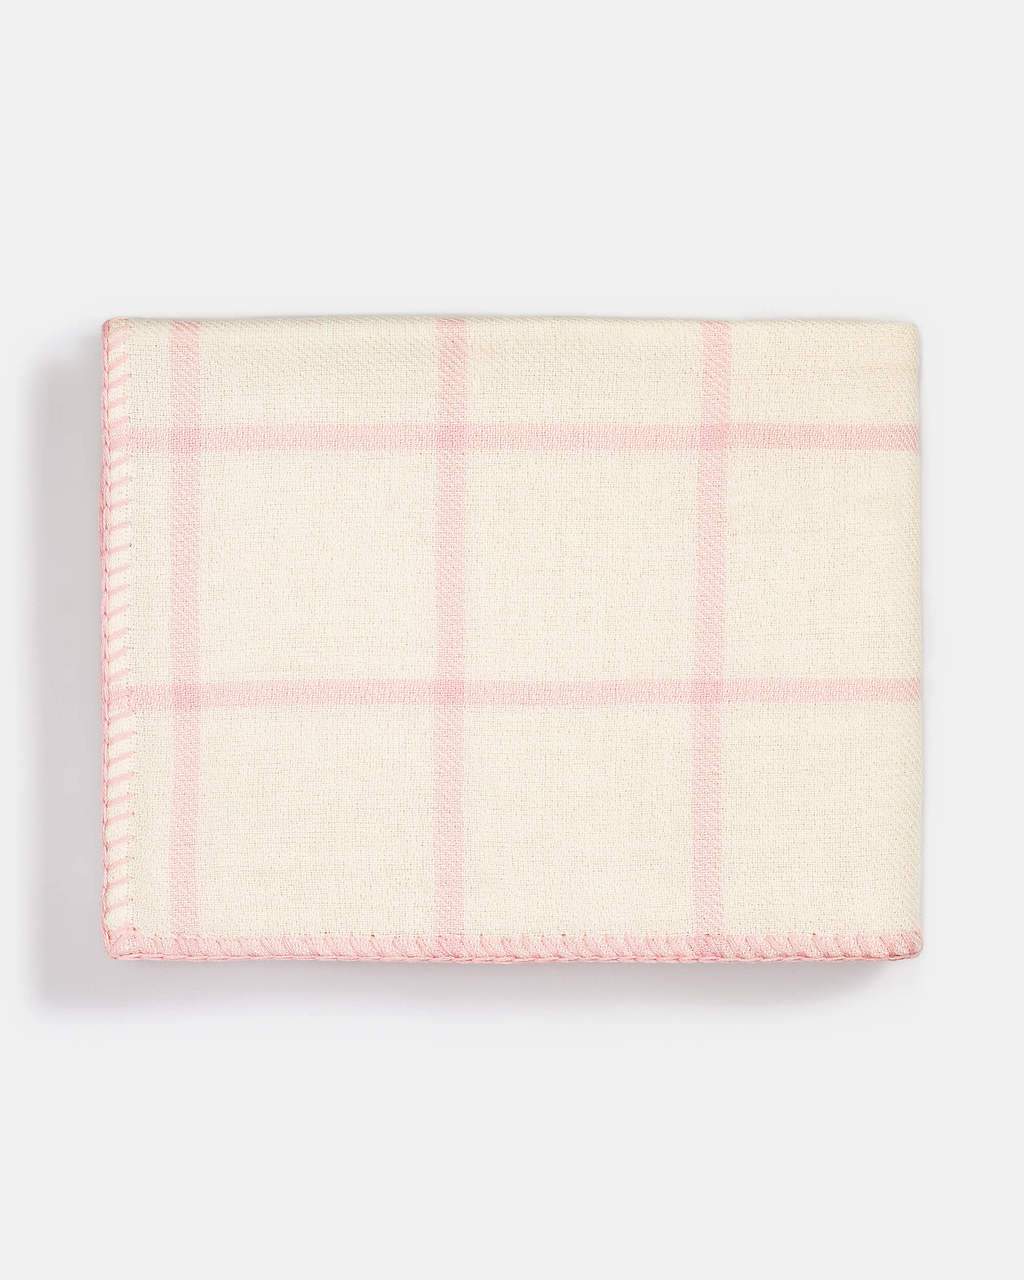 Graydon Alpaca Throw in Ivory and Light Pink by Alicia Adams